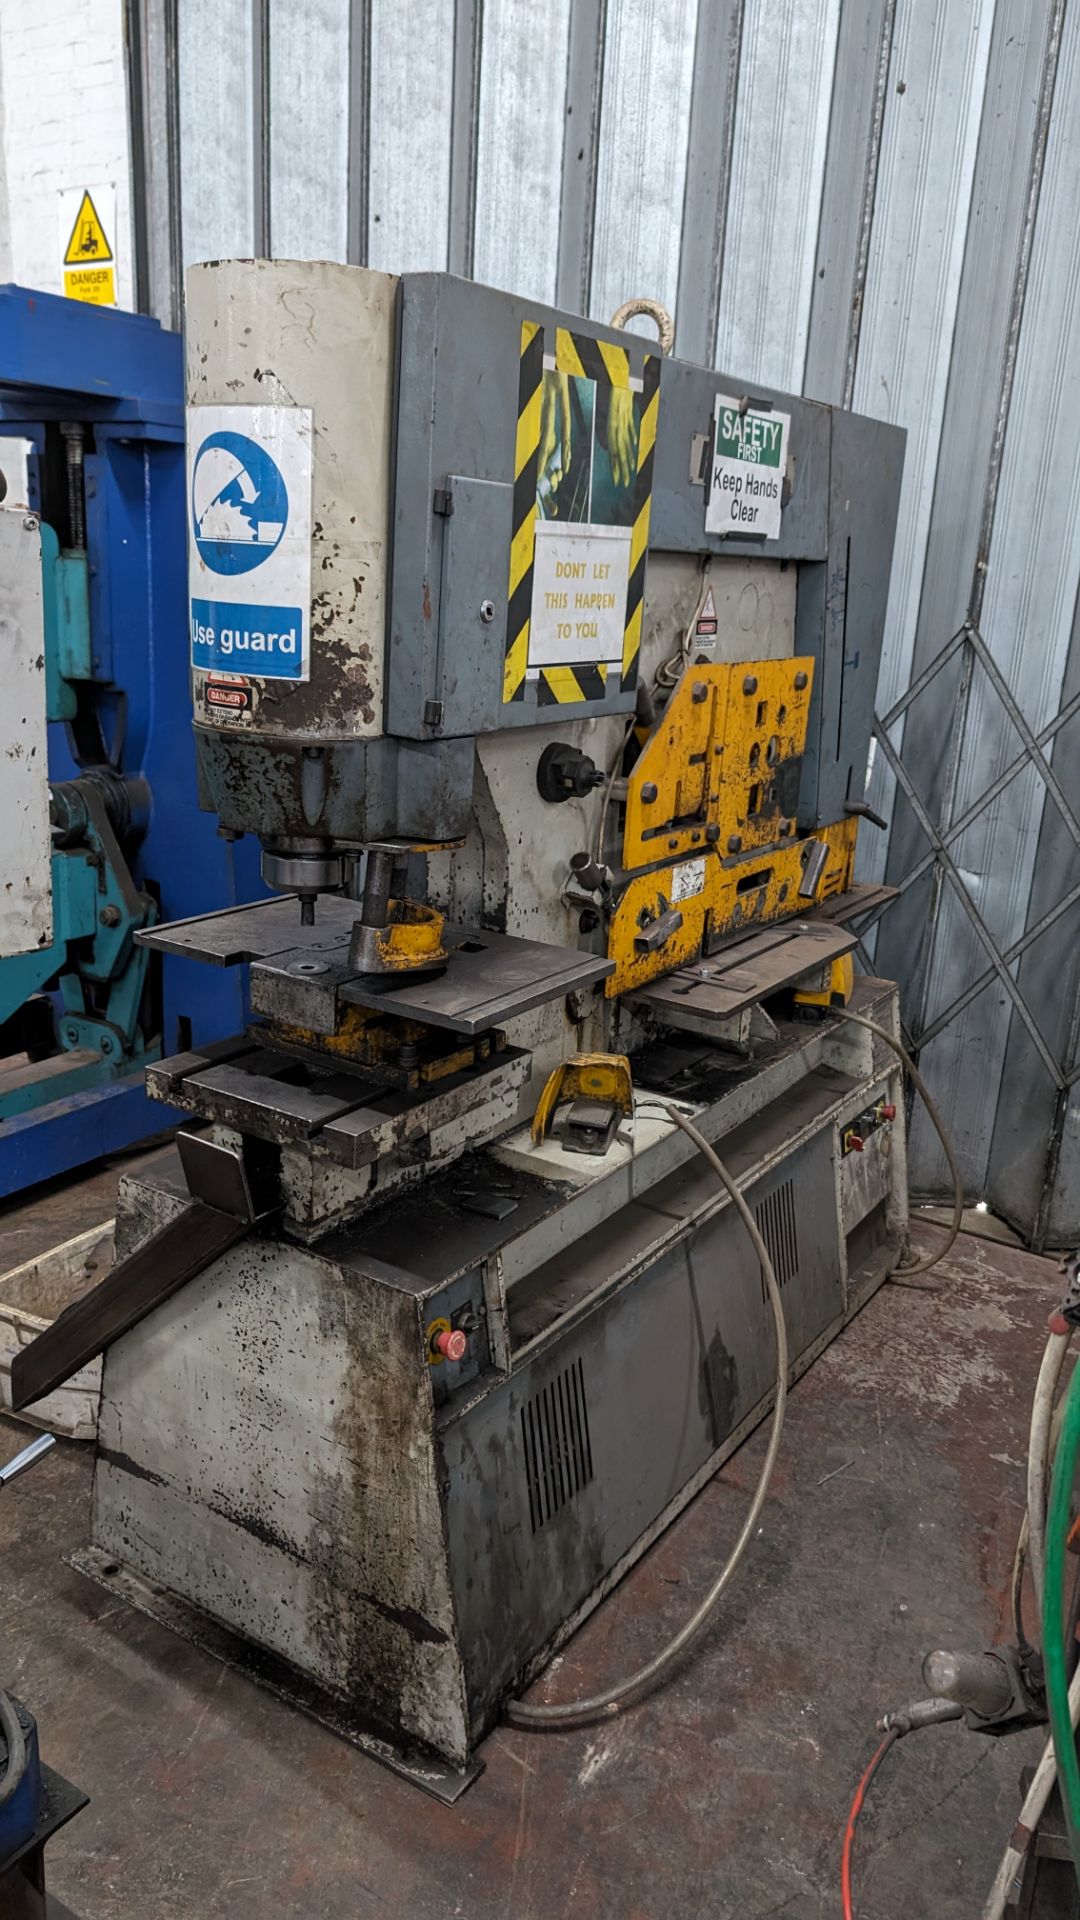 Kingsland multi 125 hydraulic metalworker, serial number 473906. Includes foot pedal plus tooling a - Image 2 of 22